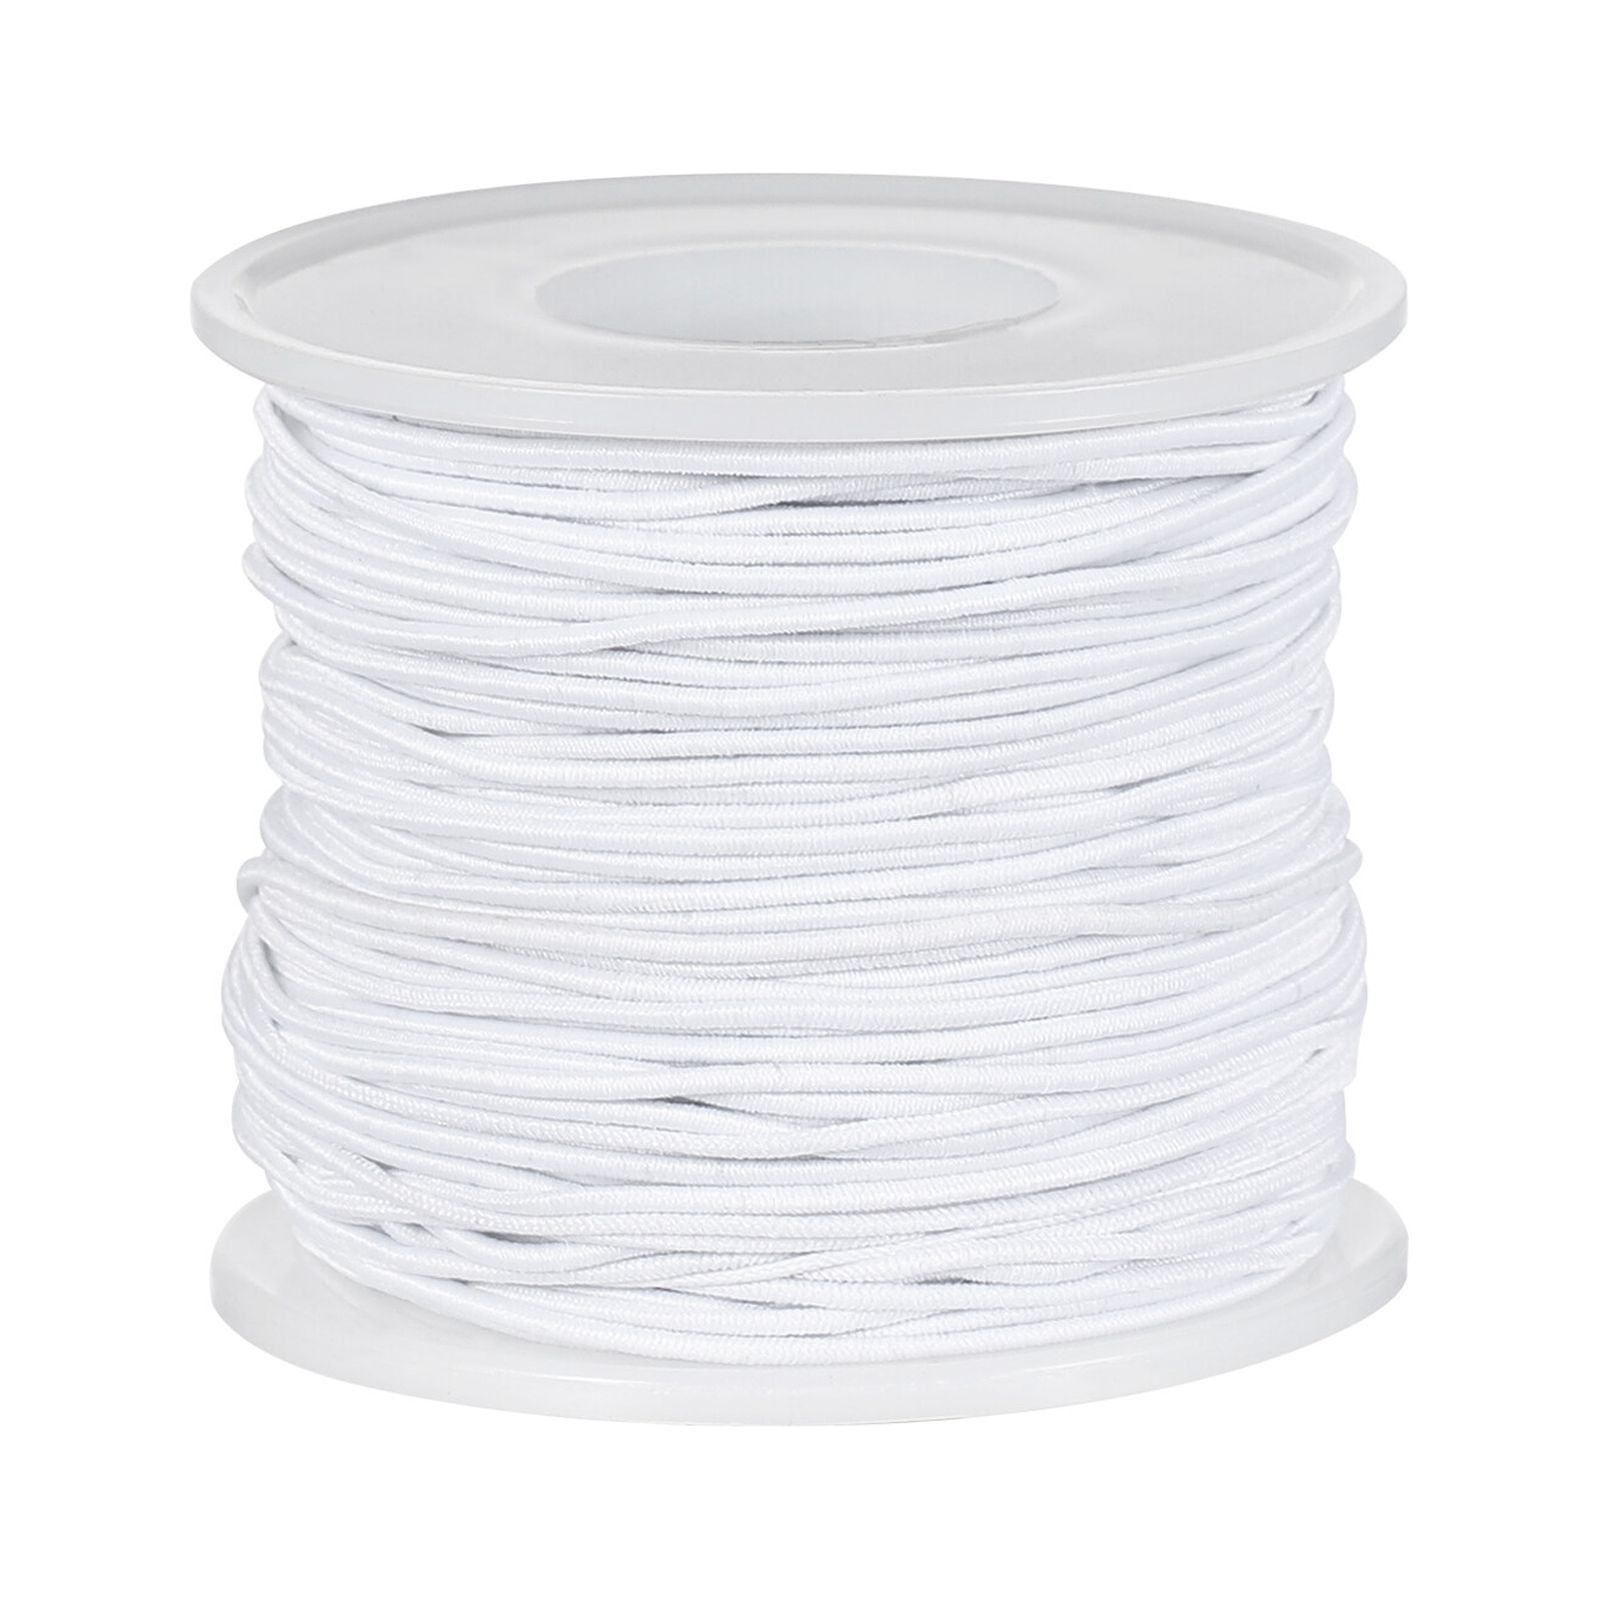 Artibetter 1 Roll 50M Elastic Band Handmade Elastic Thread DIY Manual  Wiring Strong Rope for Bracelet Jewelry Clothes (White)